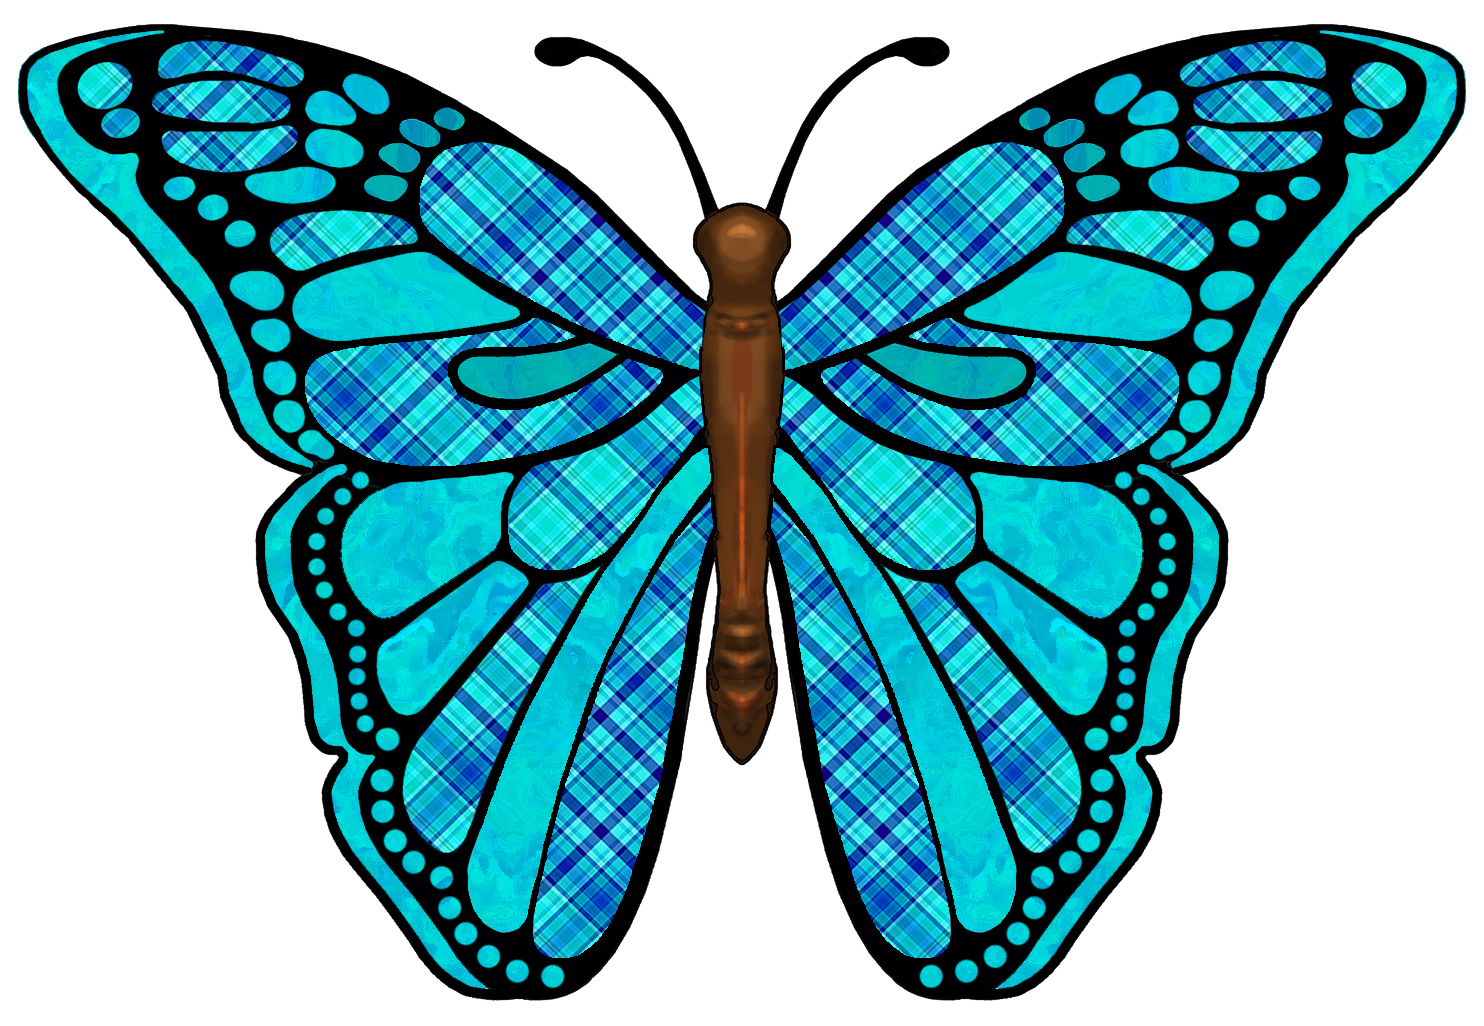 ArtbyJean - Butterflies: Turquoise plaid mixed with plain ...